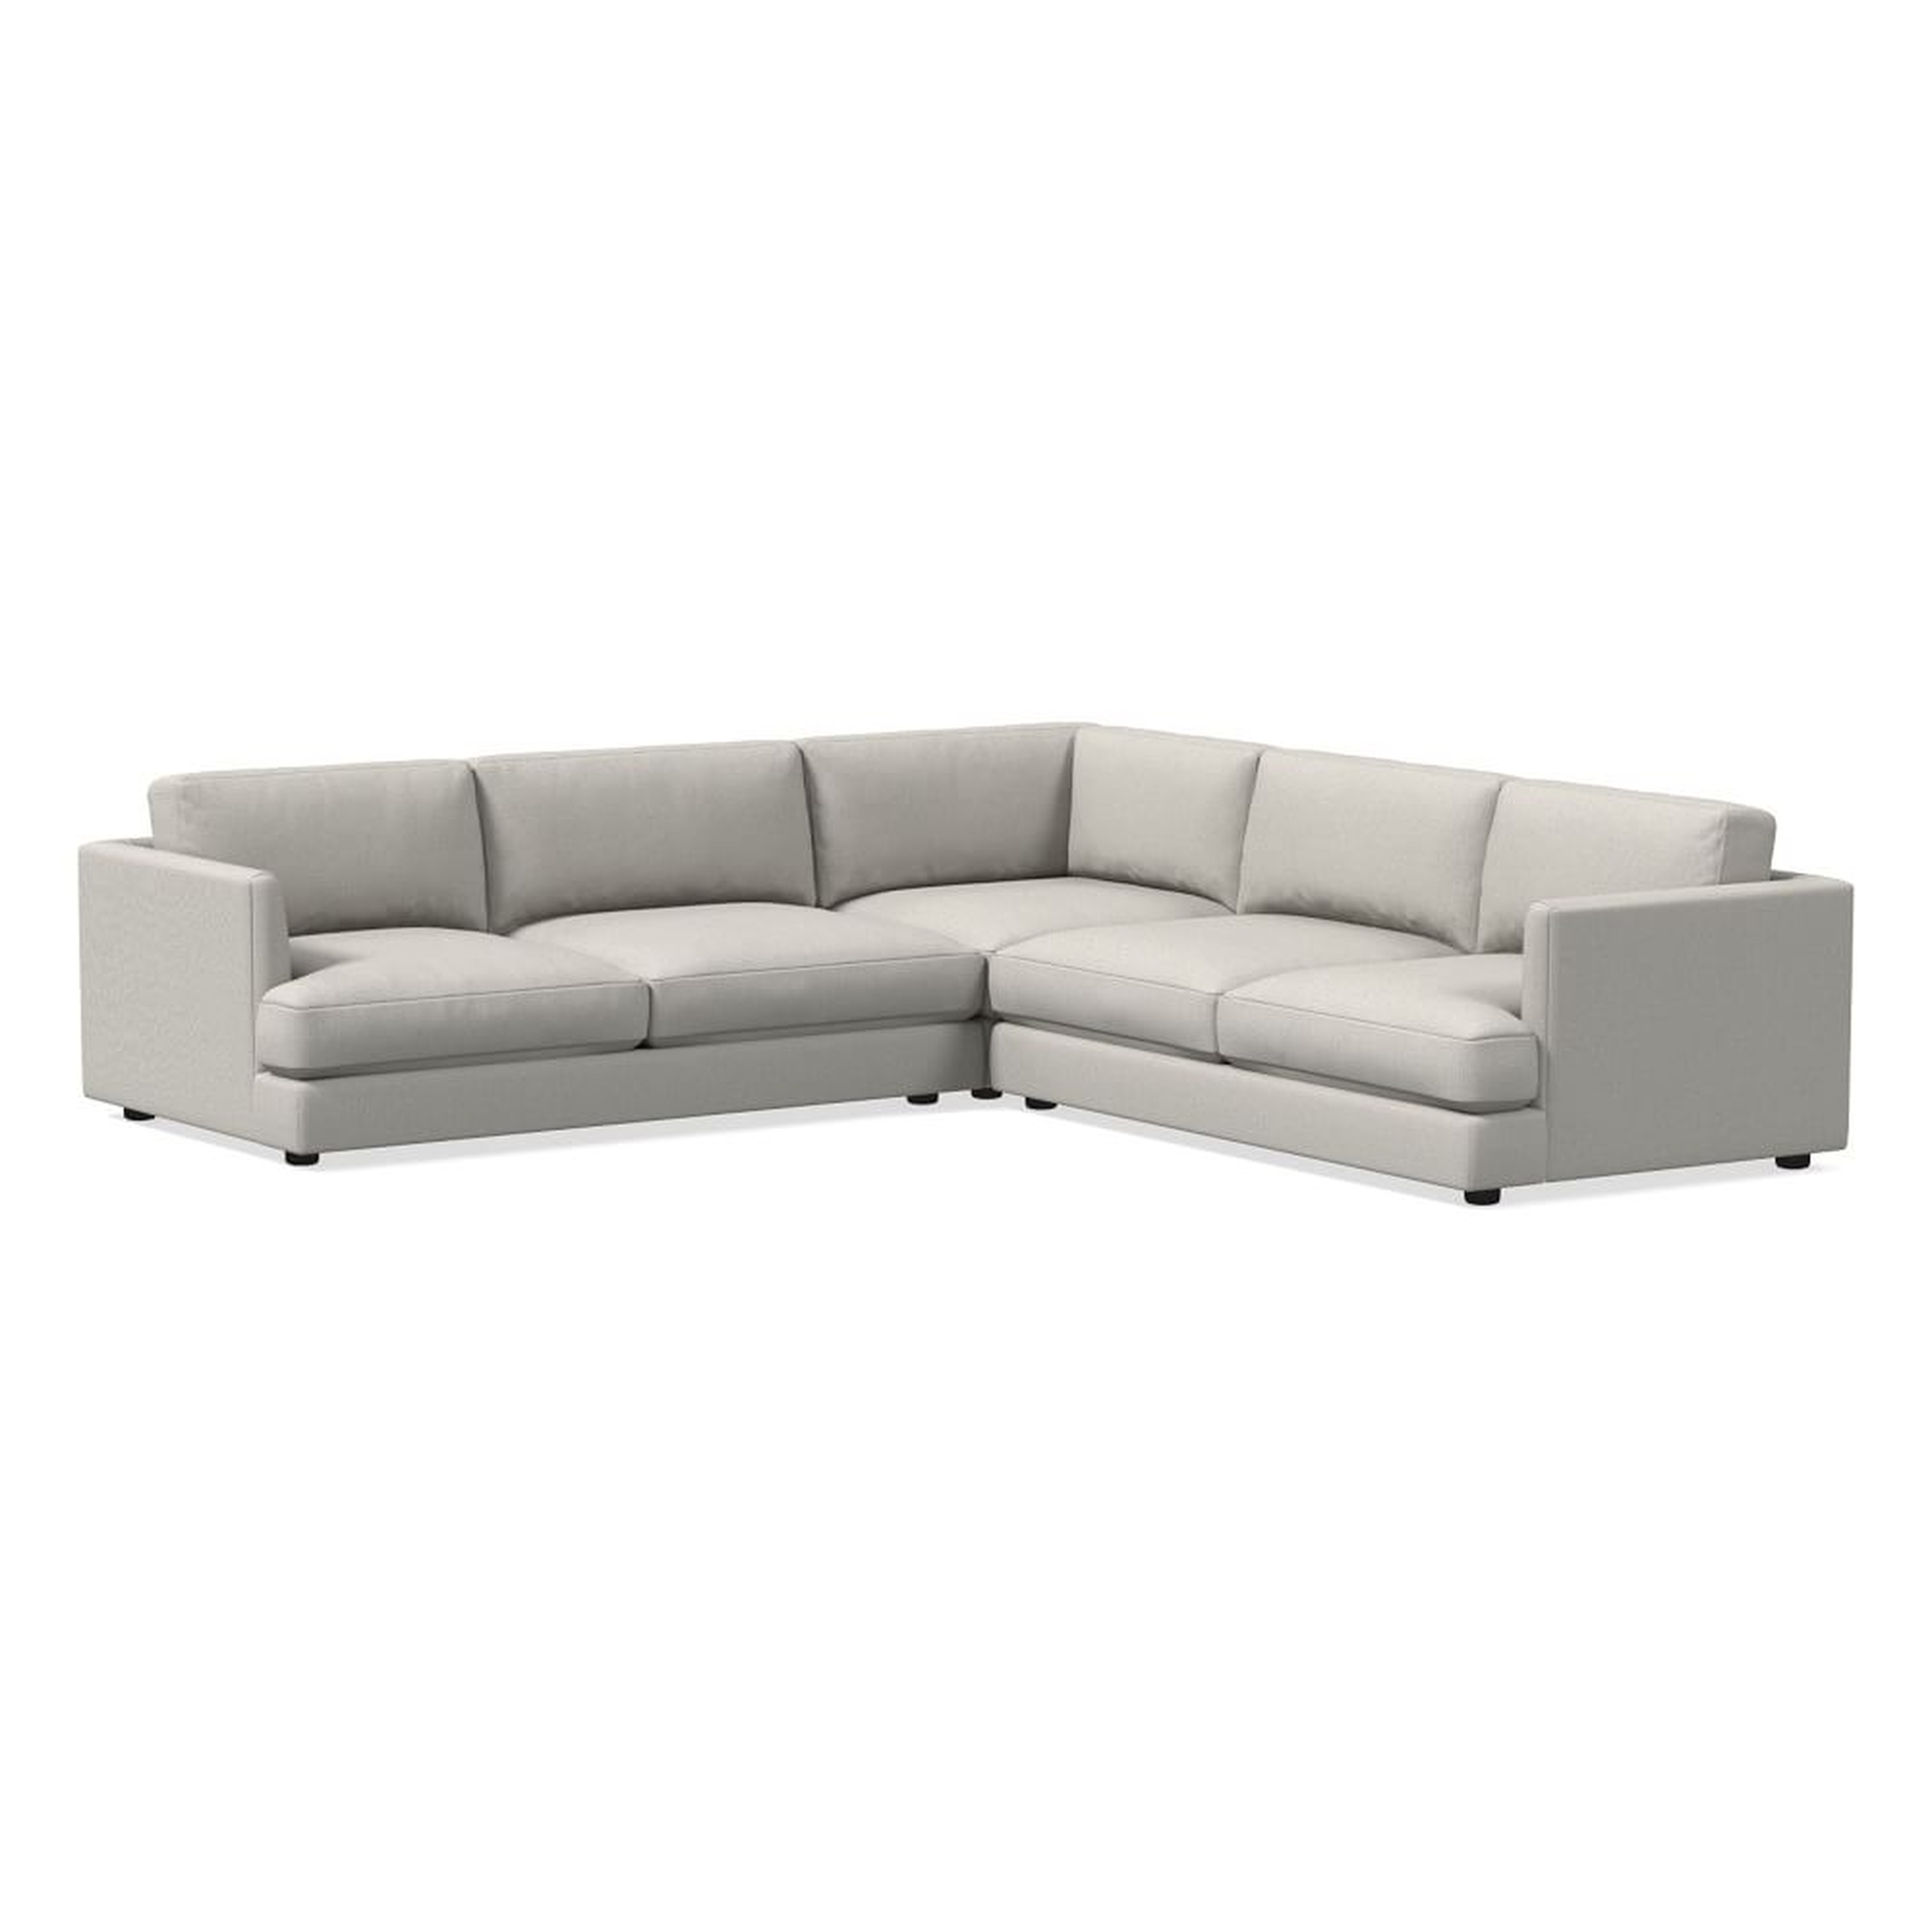 Haven 106" Multi Seat 3-Piece L-Shaped Sectional, Standard Depth, Performance Yarn Dyed Linen Weave, Frost Gray - West Elm